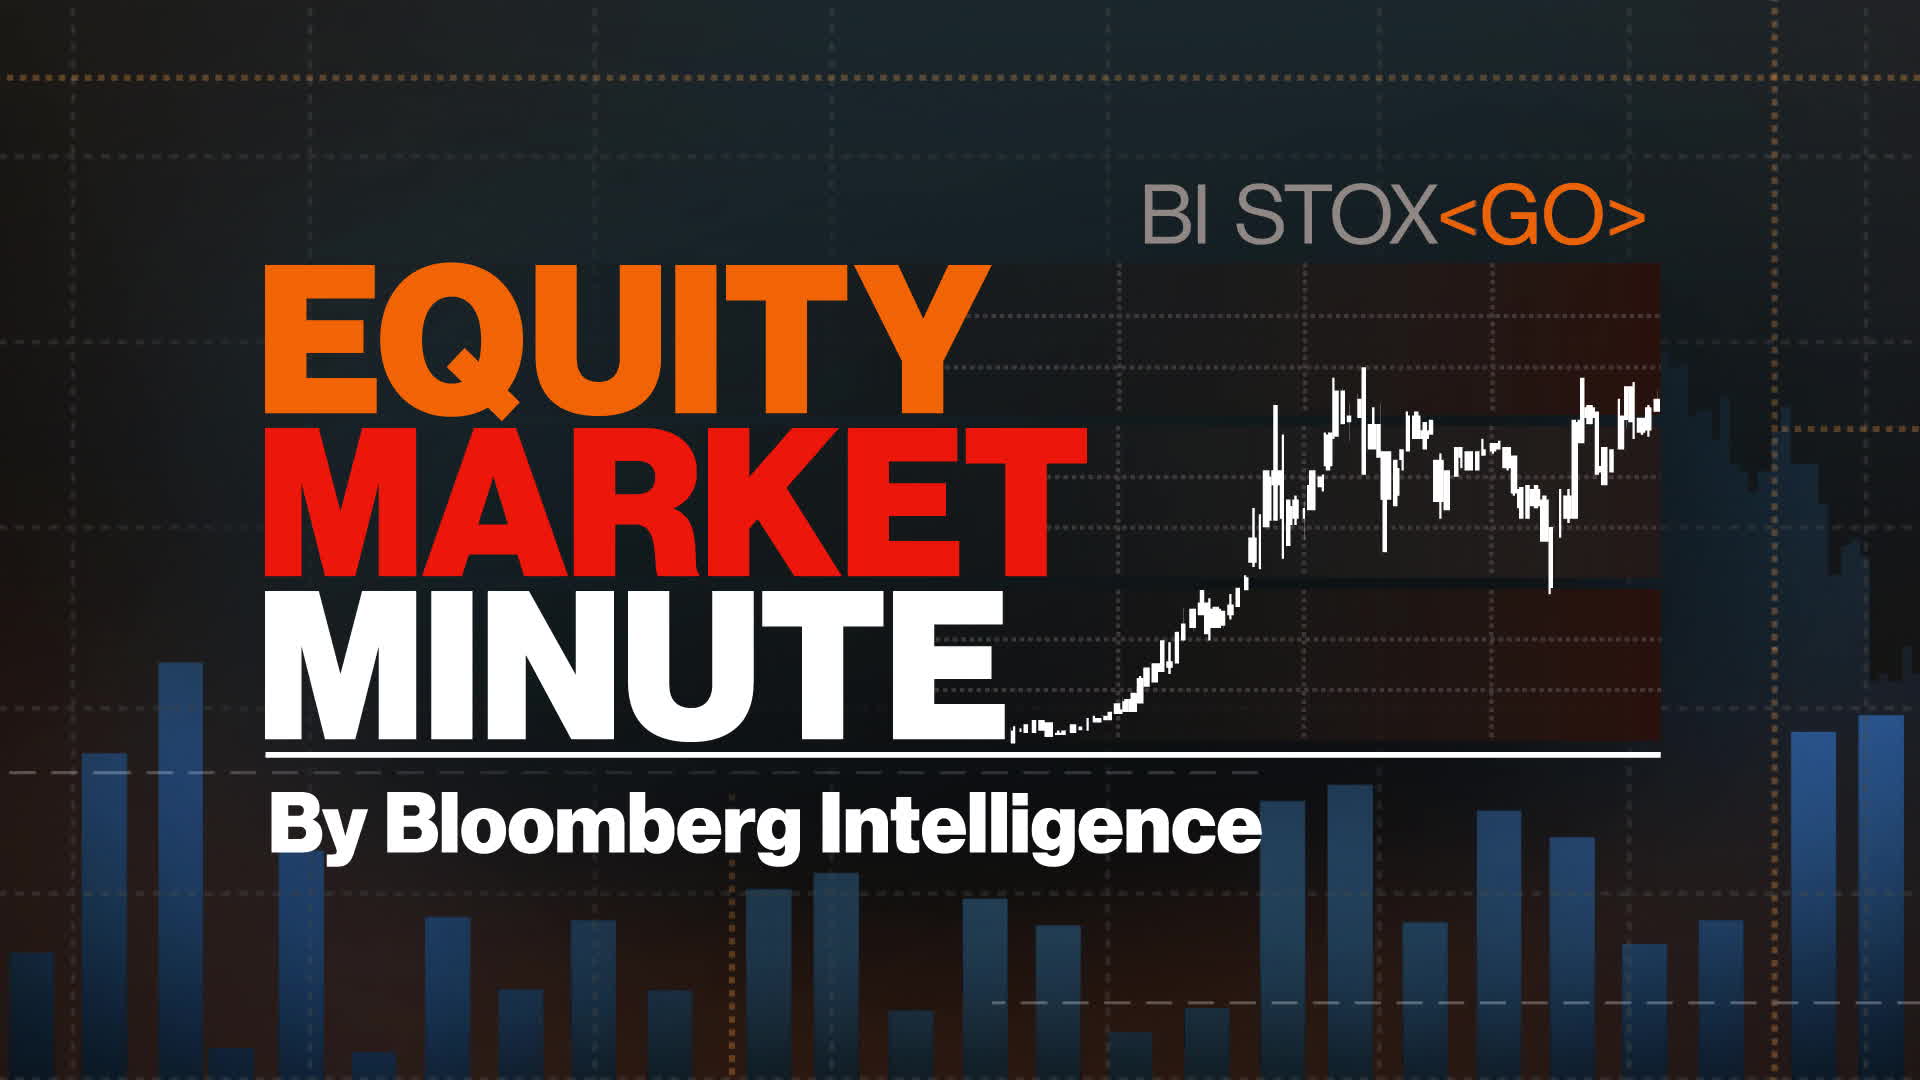 Bloomberg Intelligence's 'Equity Market Minute' 1/18/2022